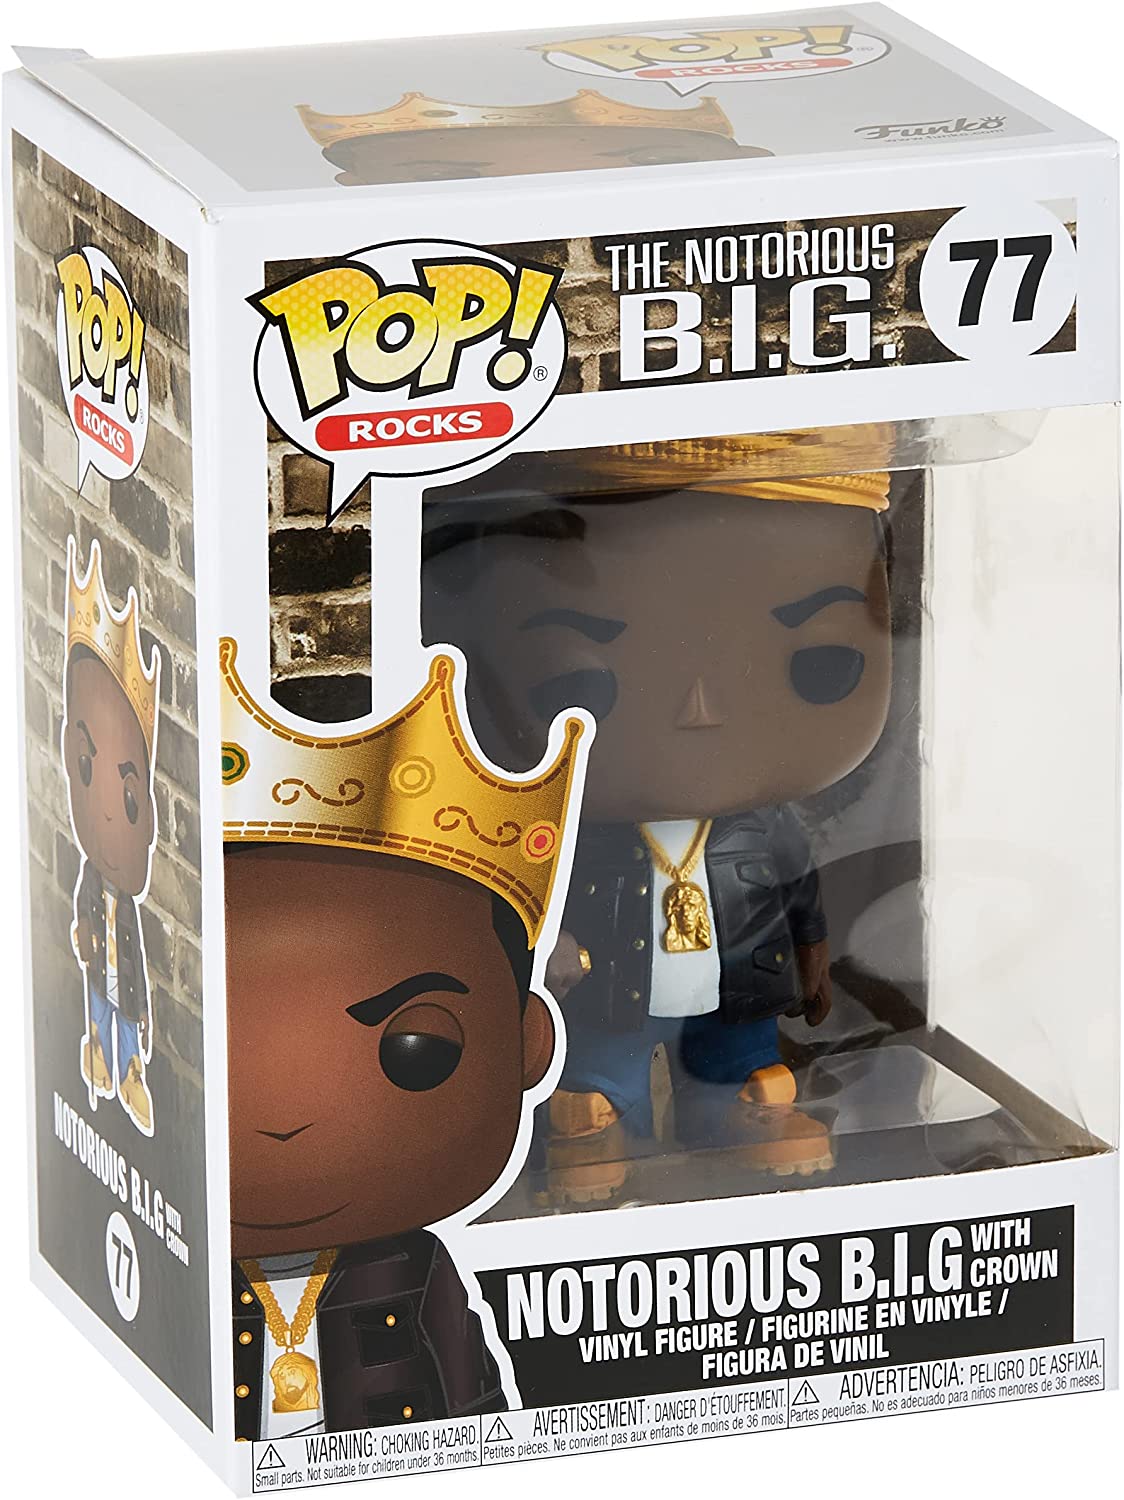 Figurine Vinyl FUNKO POP The Notorious B.I.G. : with Crown #77